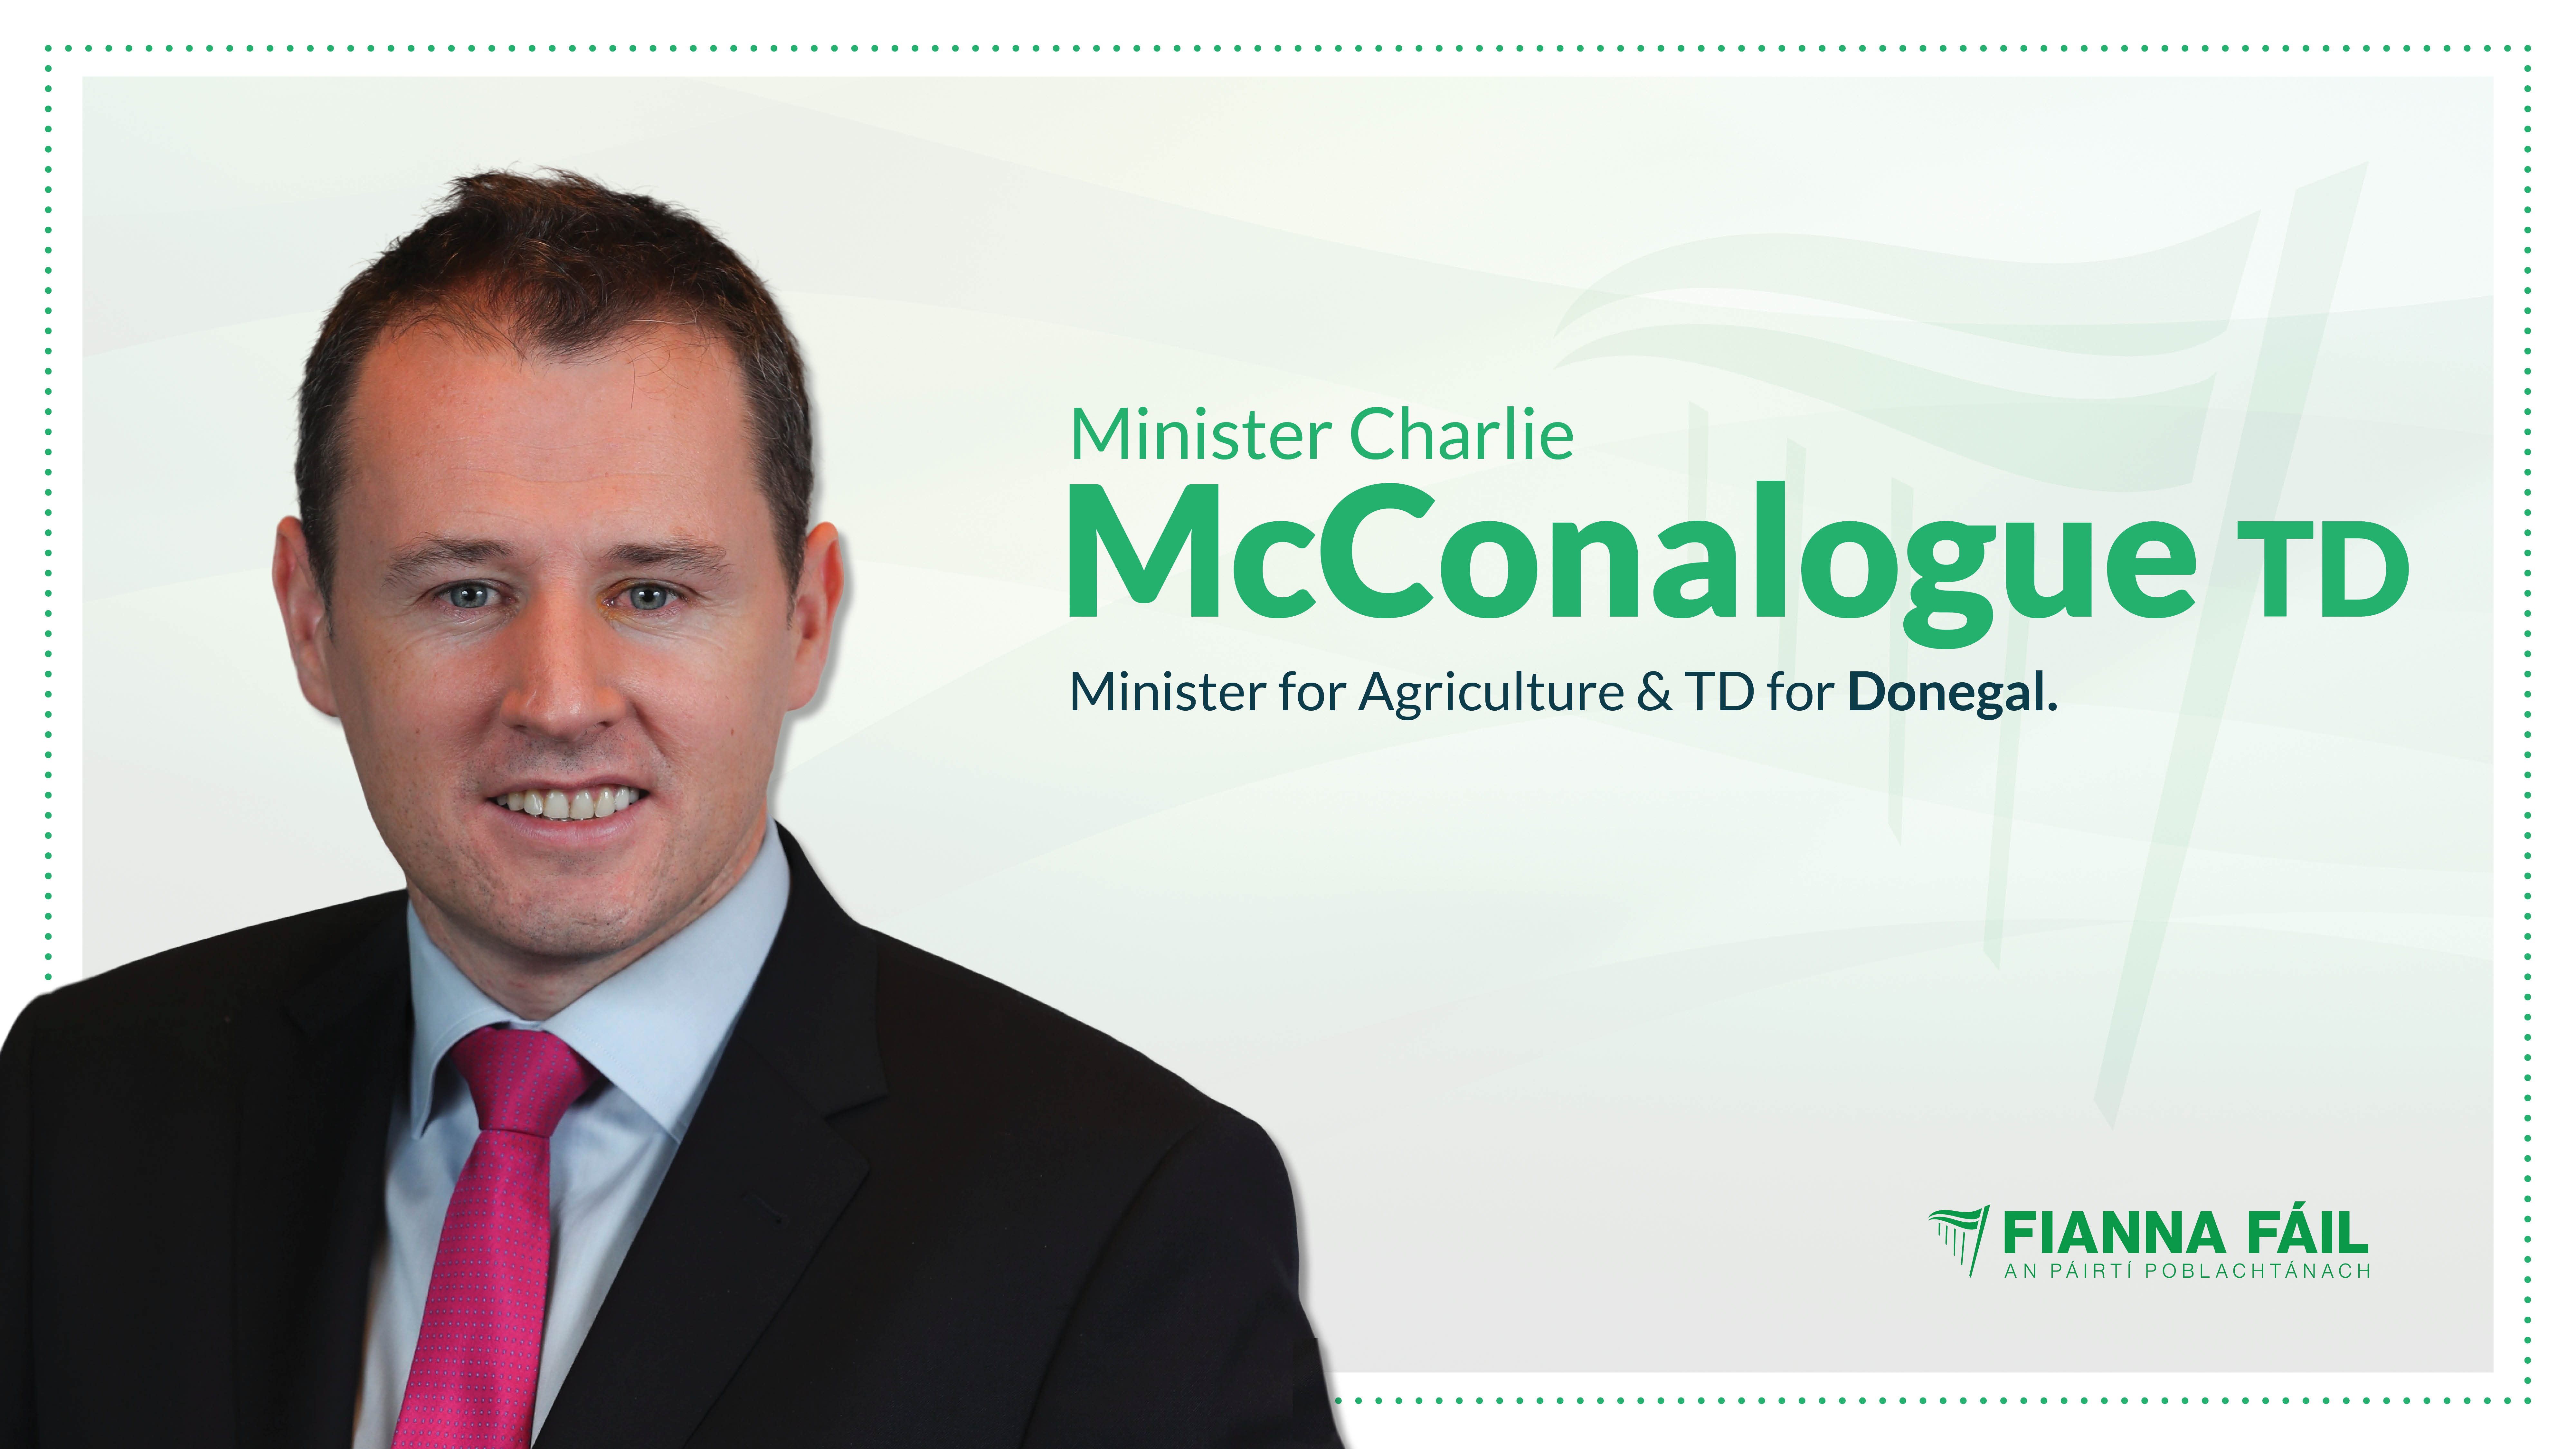 McConalogue emphasises Ireland’s priorities for EU/UK consultations on 2021 fish quotas